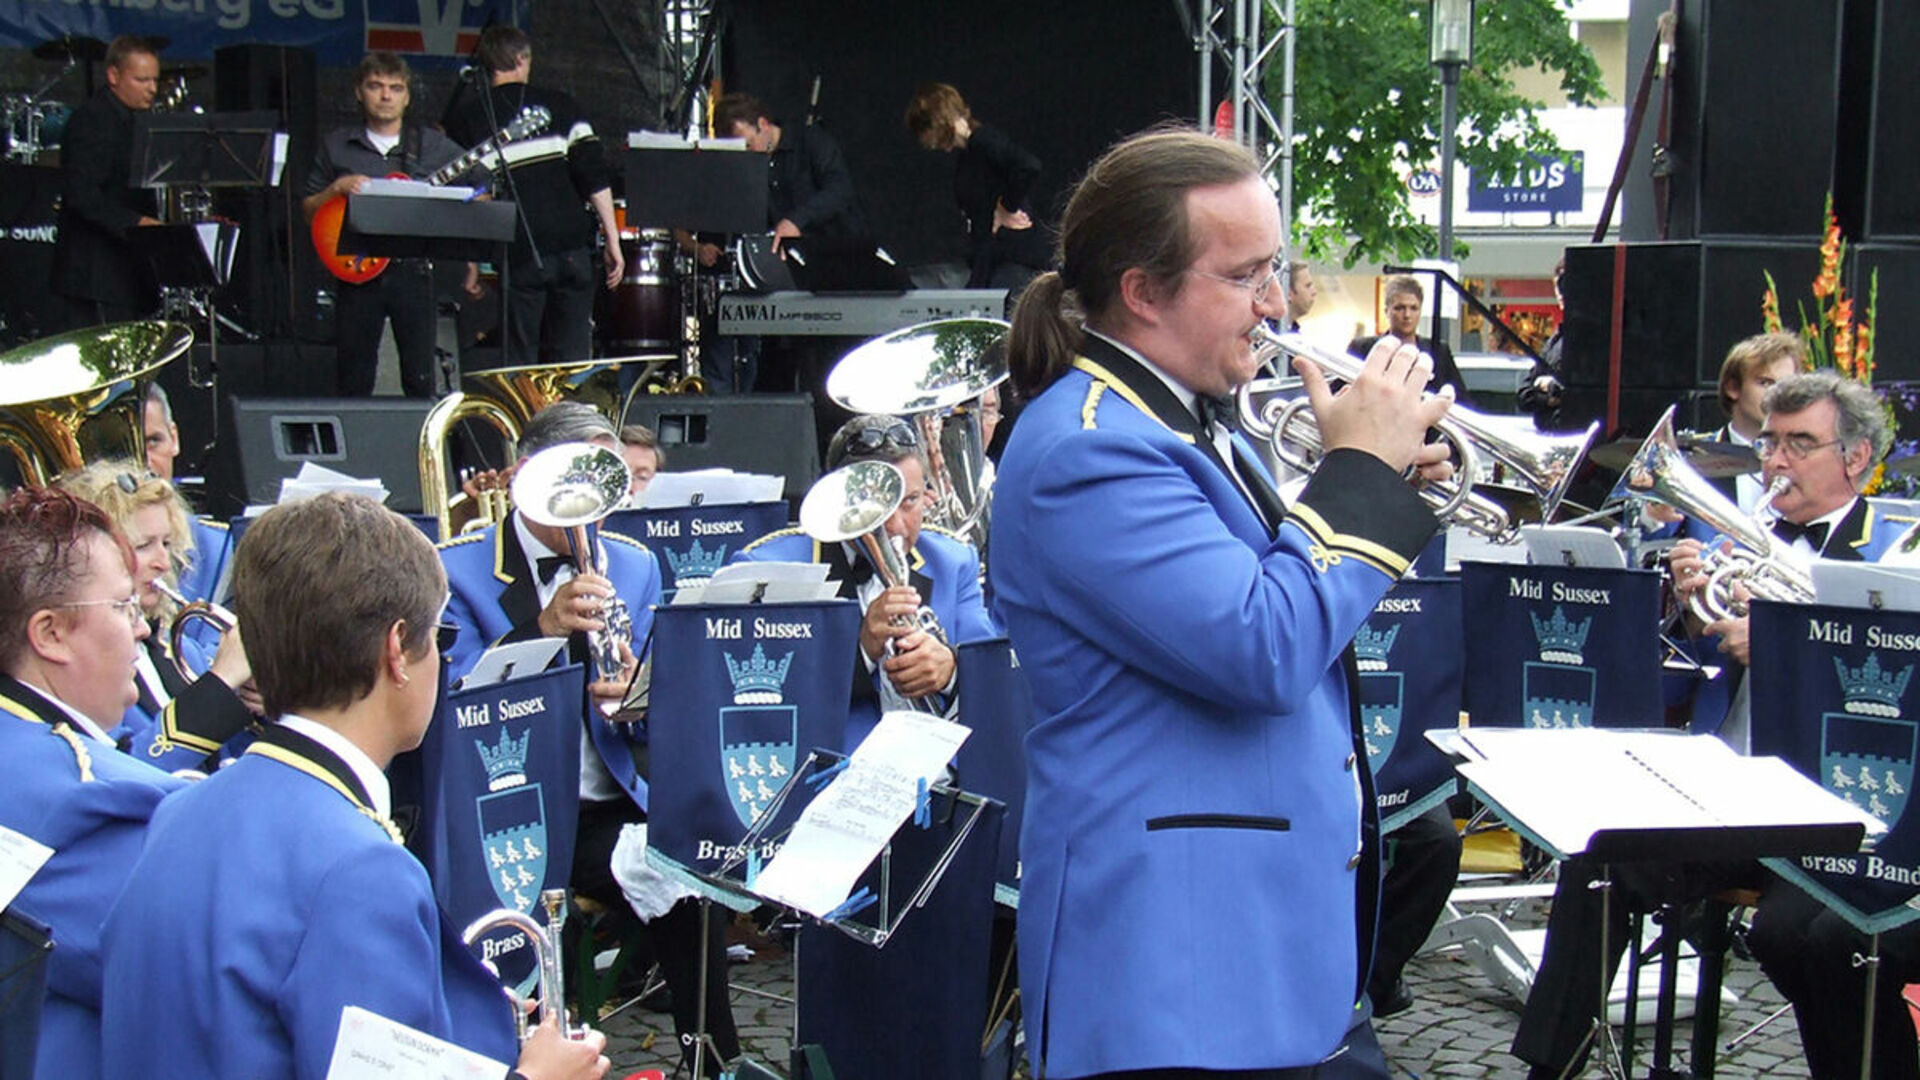 Mid Sussex Brass Band